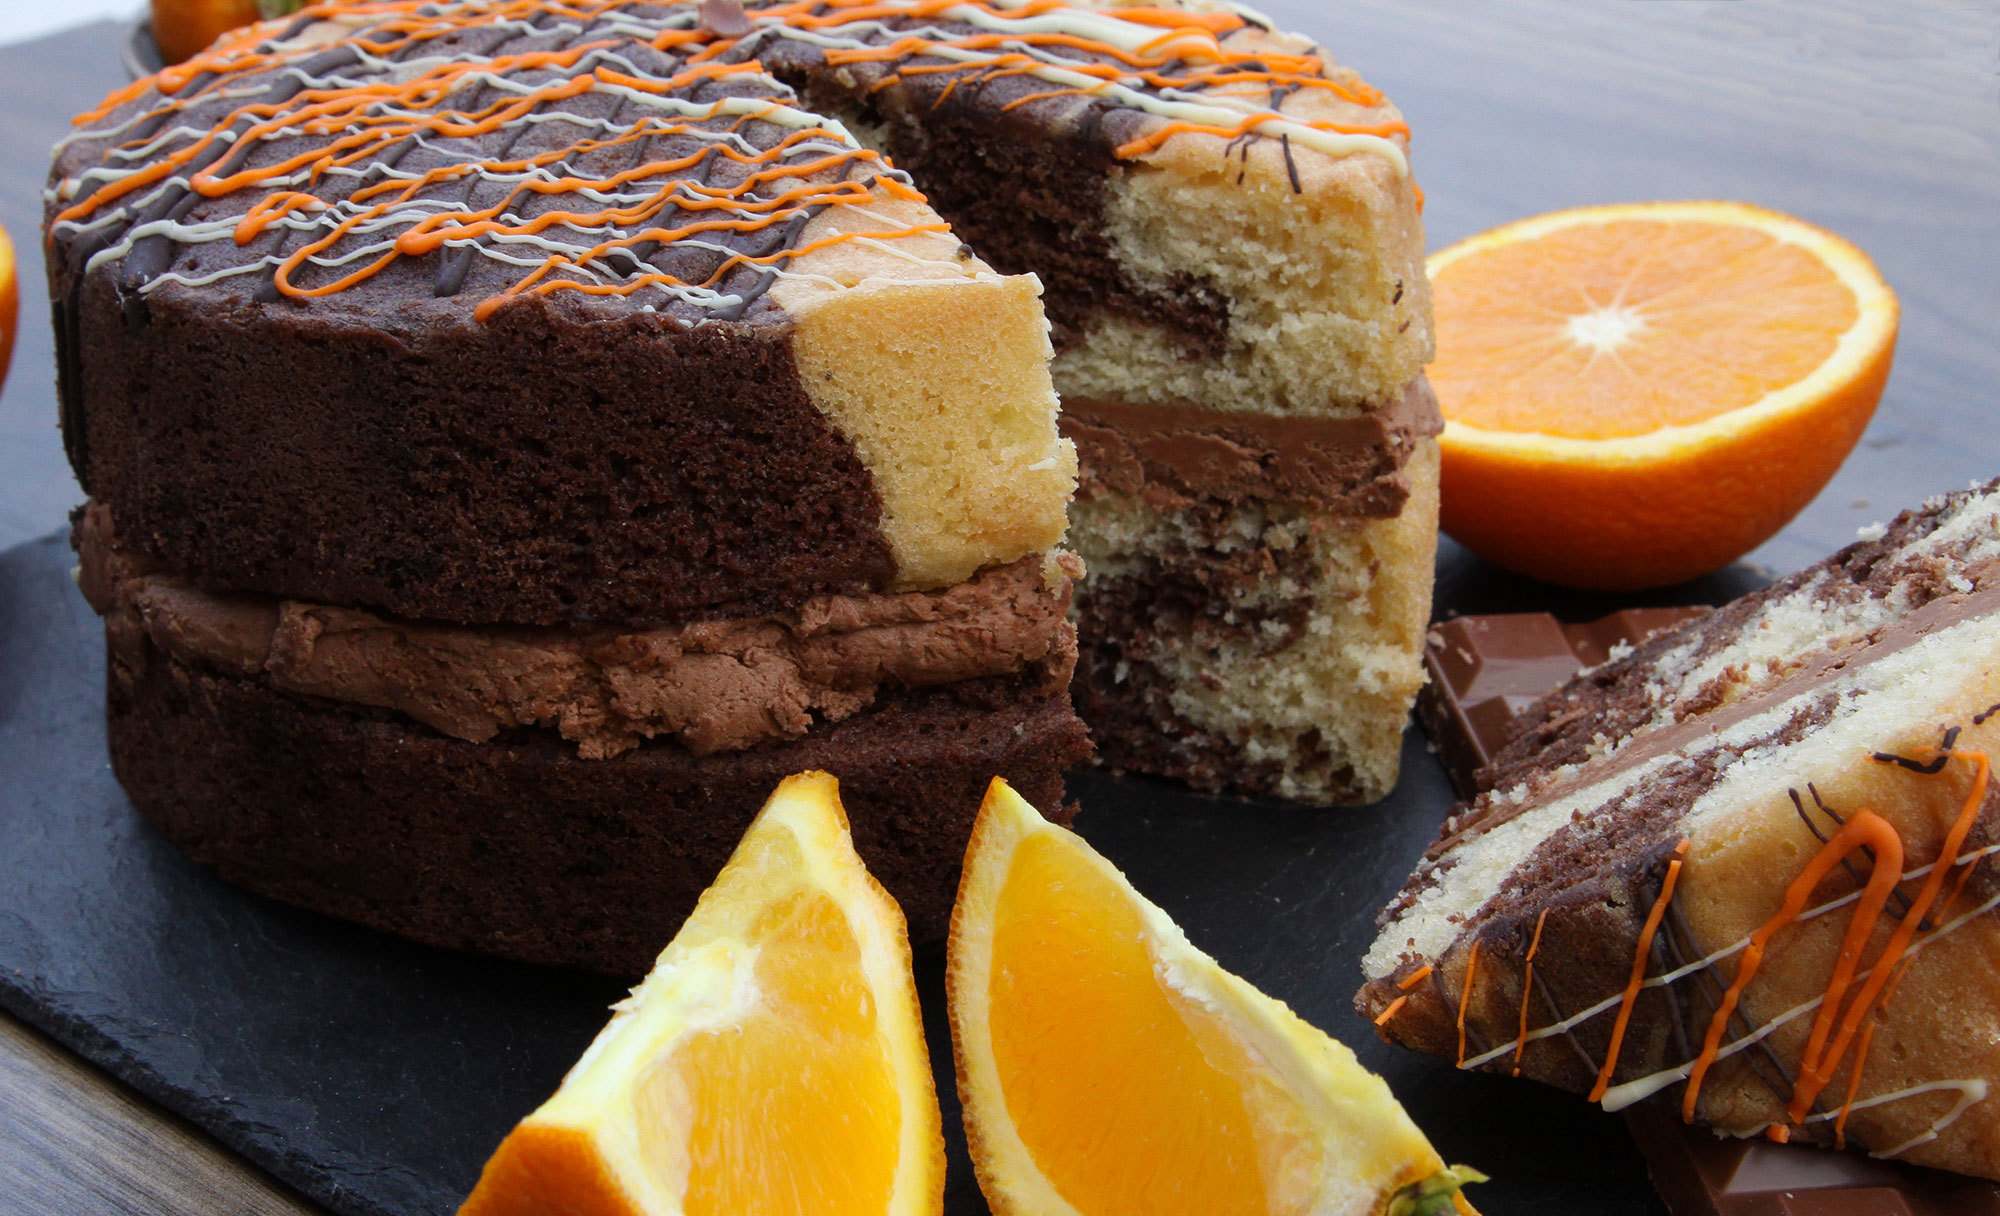 Celebrate the weekend with a Chocolate Orange SPONGE Friday! Order by Thursday 2pm for delivery on Friday!